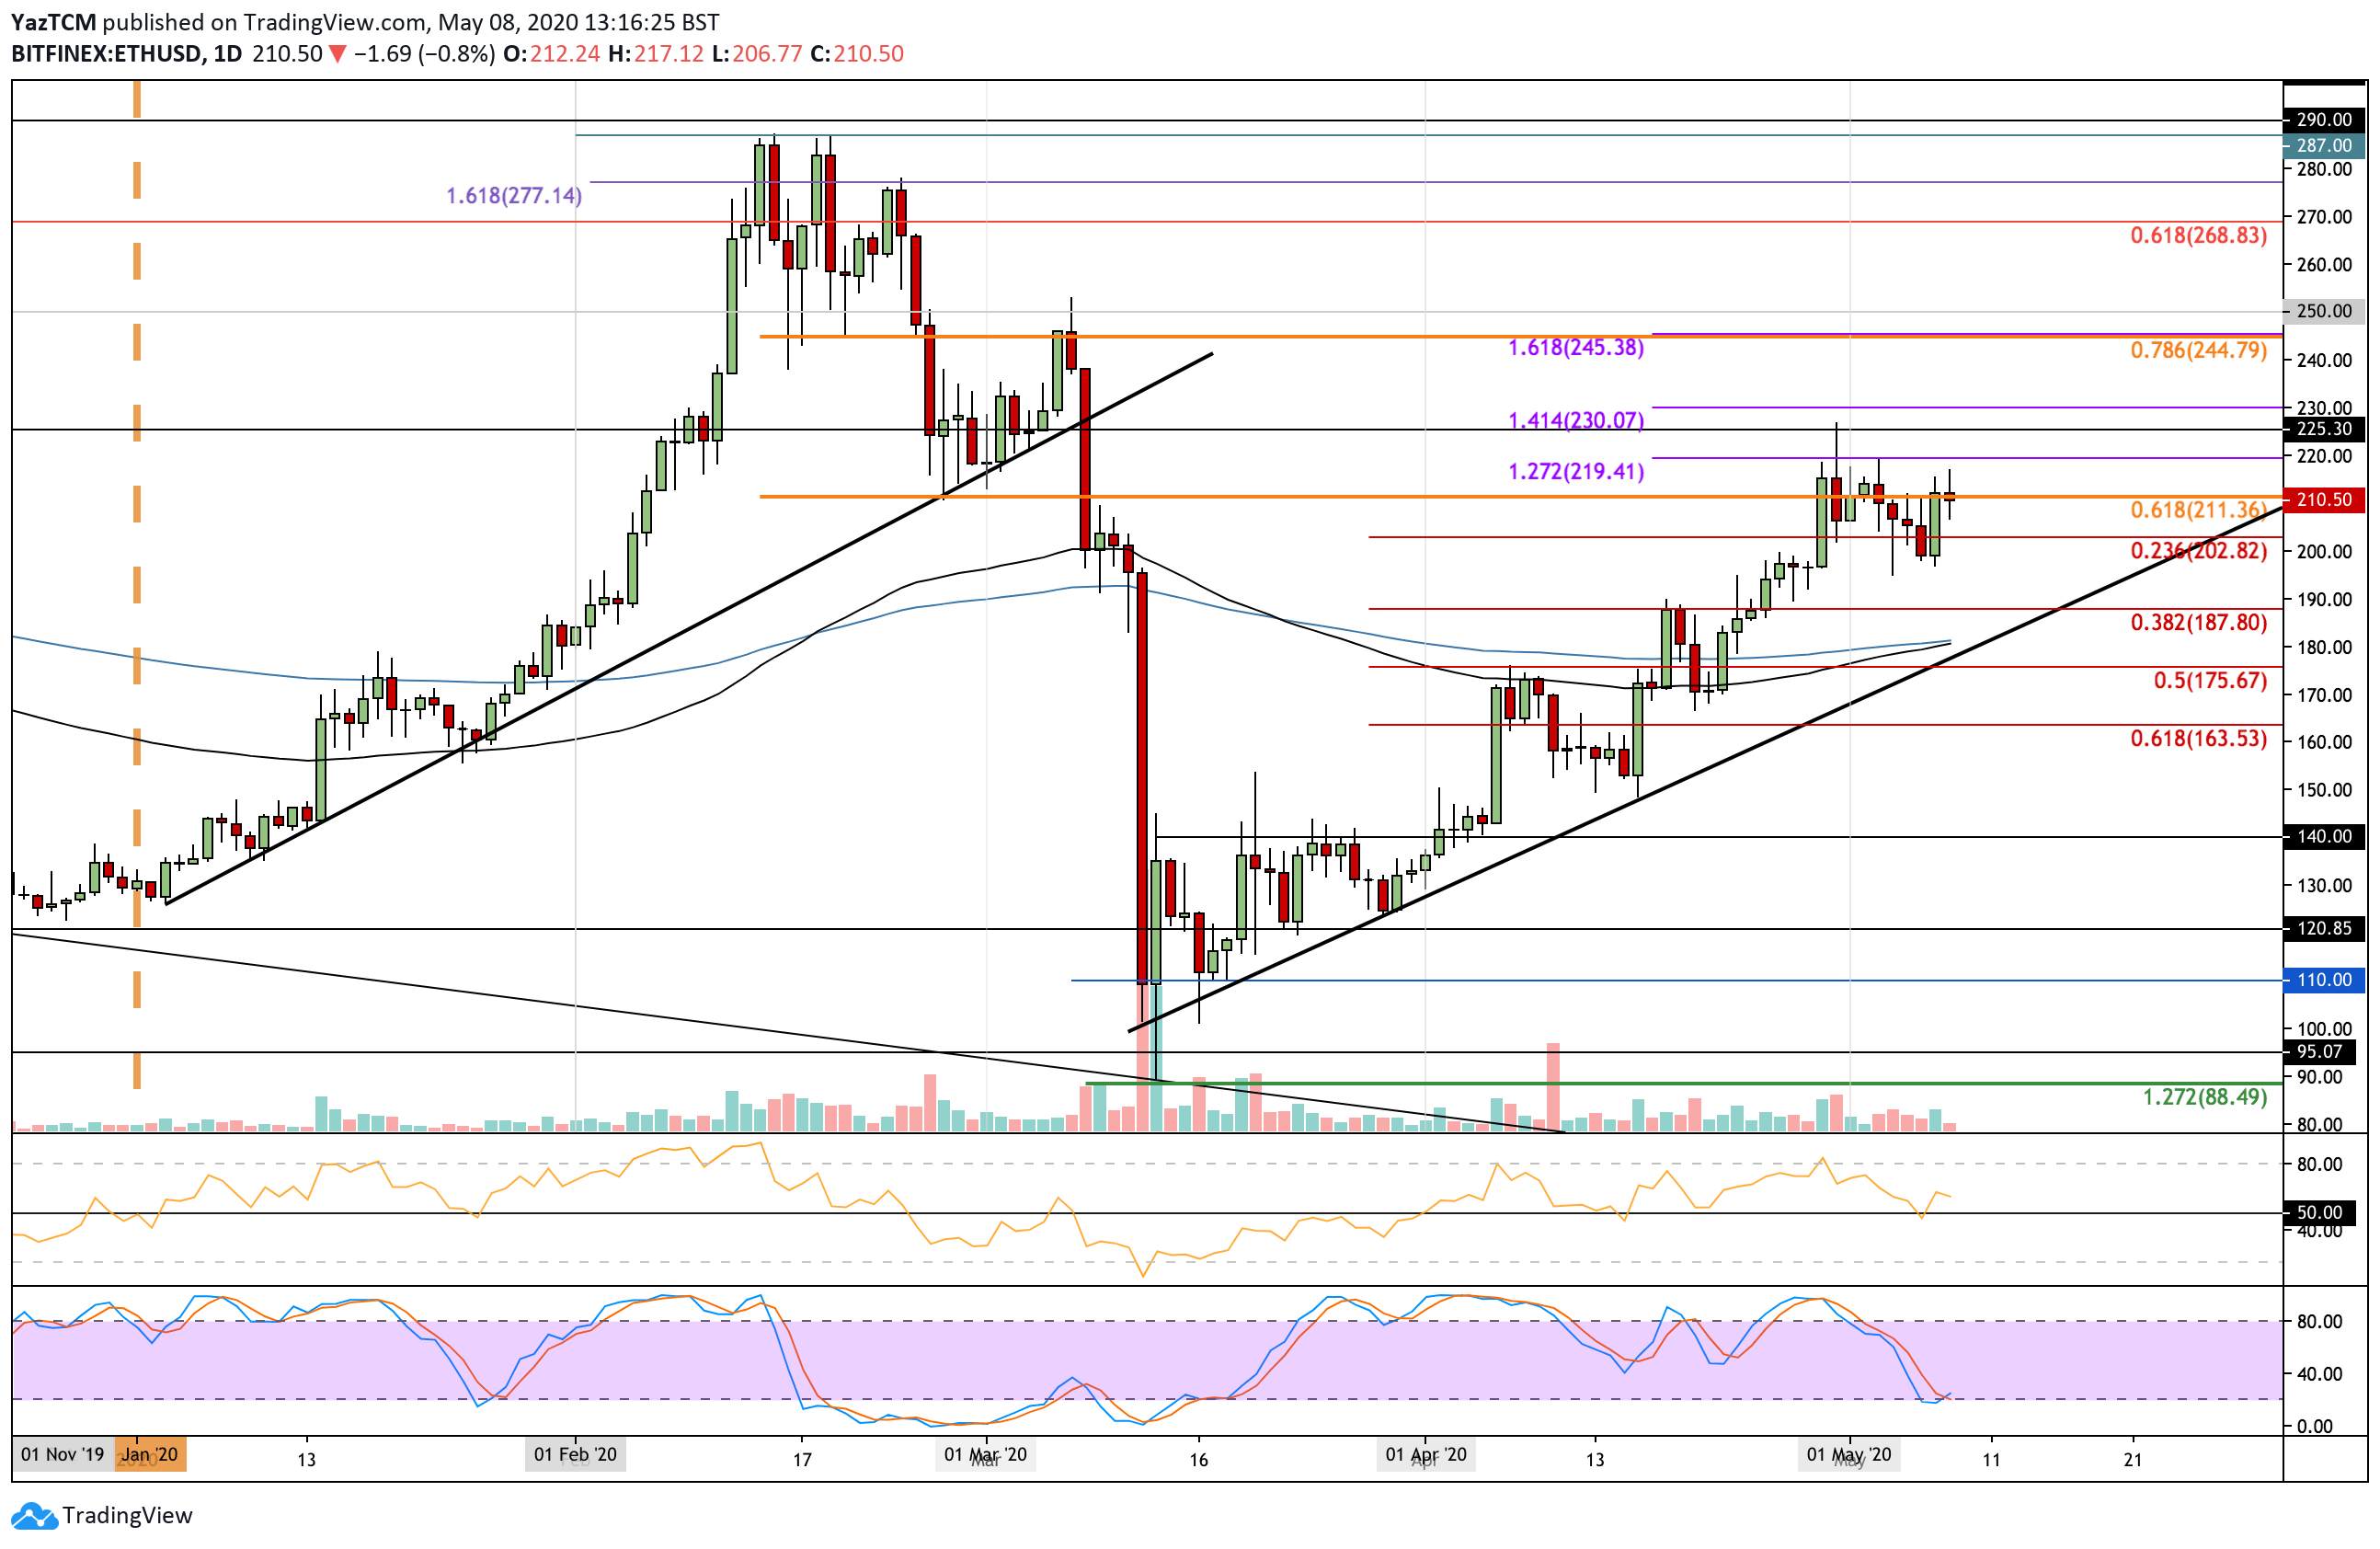 Crypto Price Analysis & Overview May 8th: Bitcoin, Ethereum, Ripple, Monero, and Tron